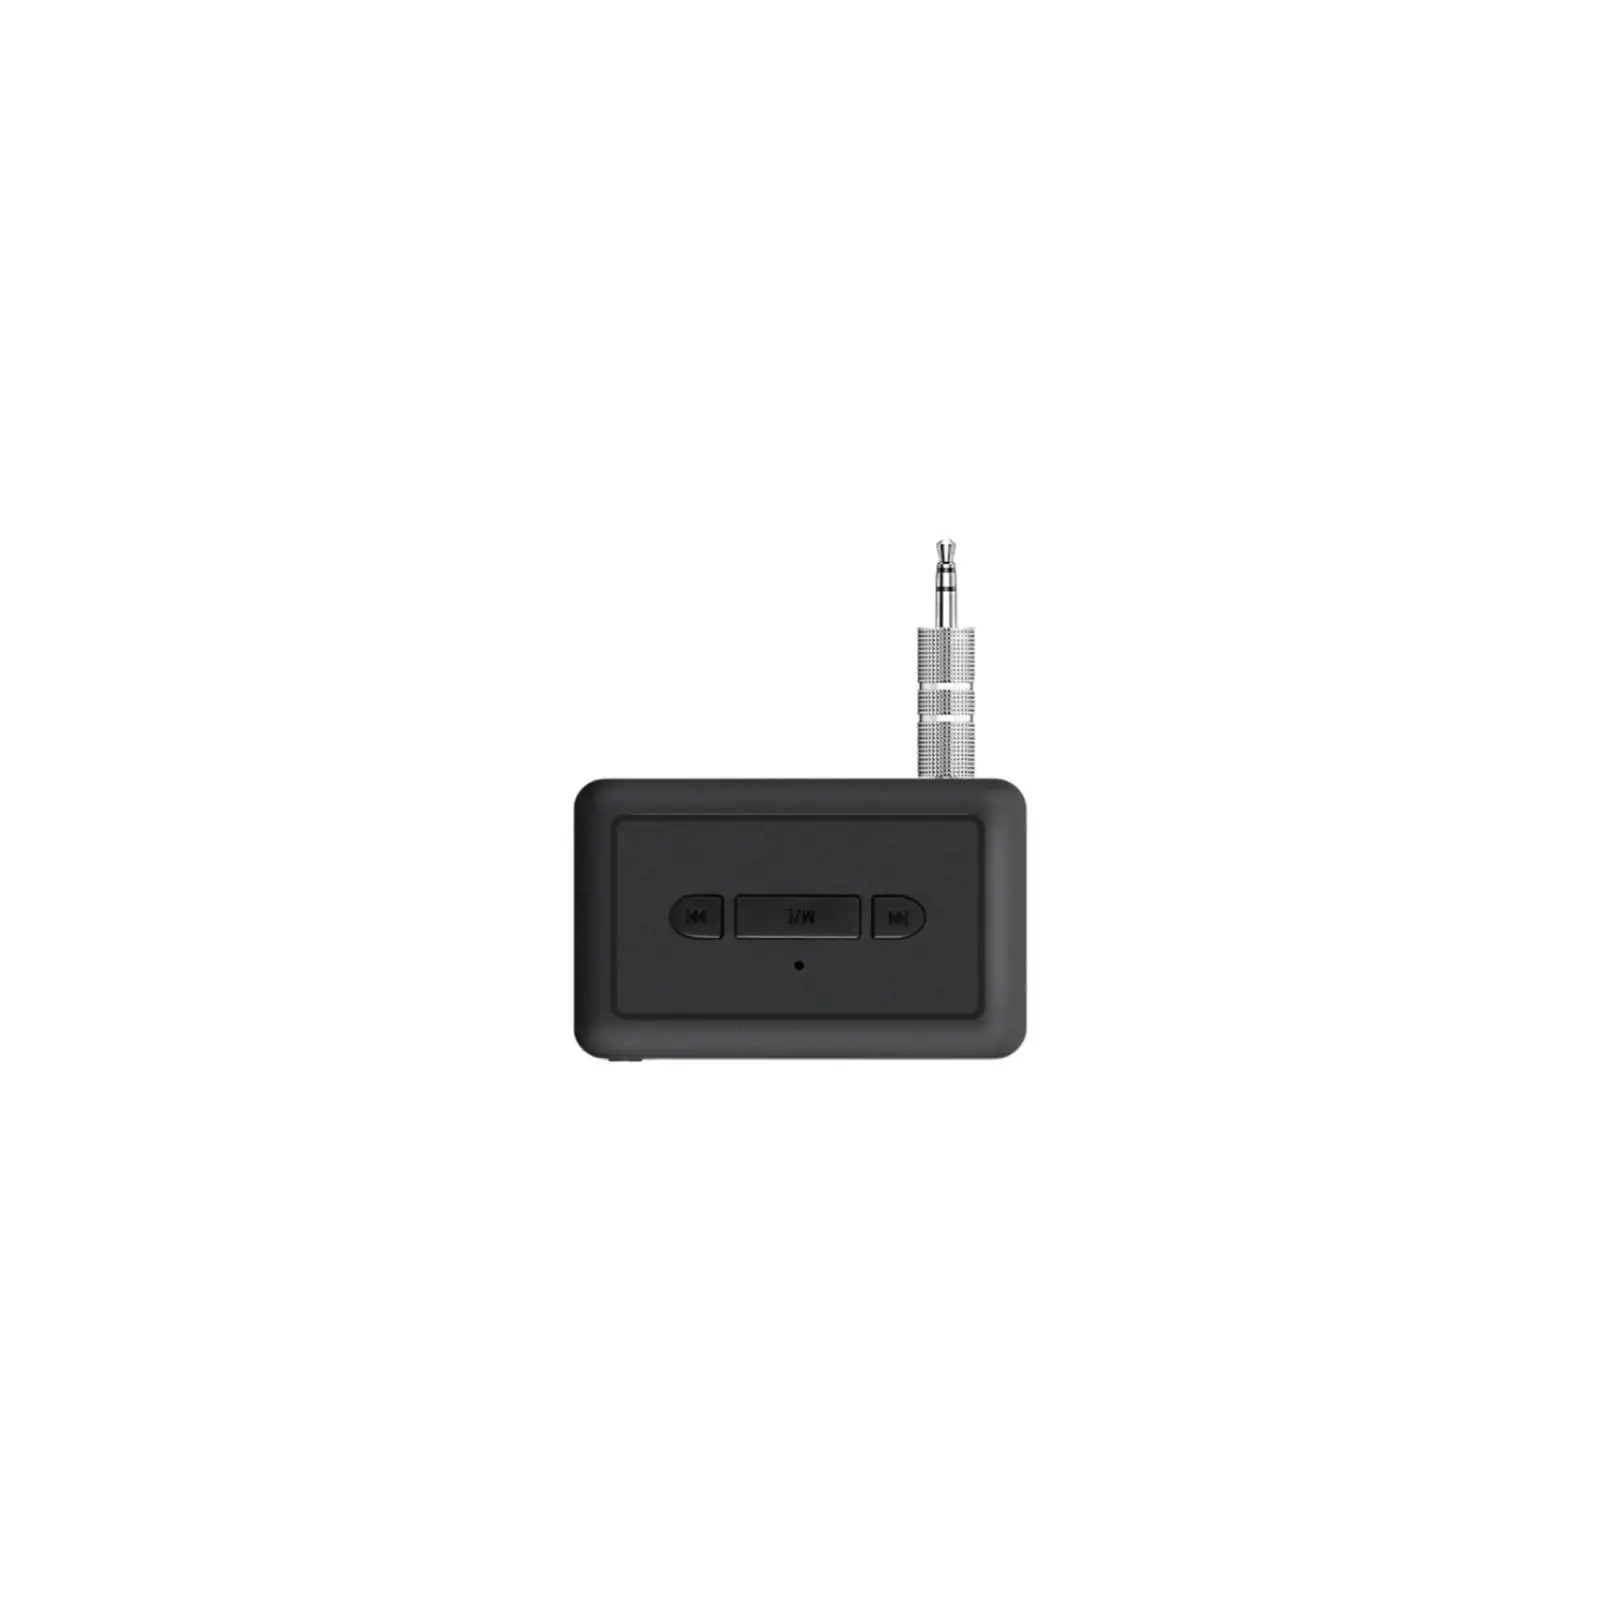 AUX Transmitter and Receiver TX and RX Mode U Disk Audio Portable Wireless Bluetooth 5.3 Receiver Adapter for TV Car PC MP3 MP4